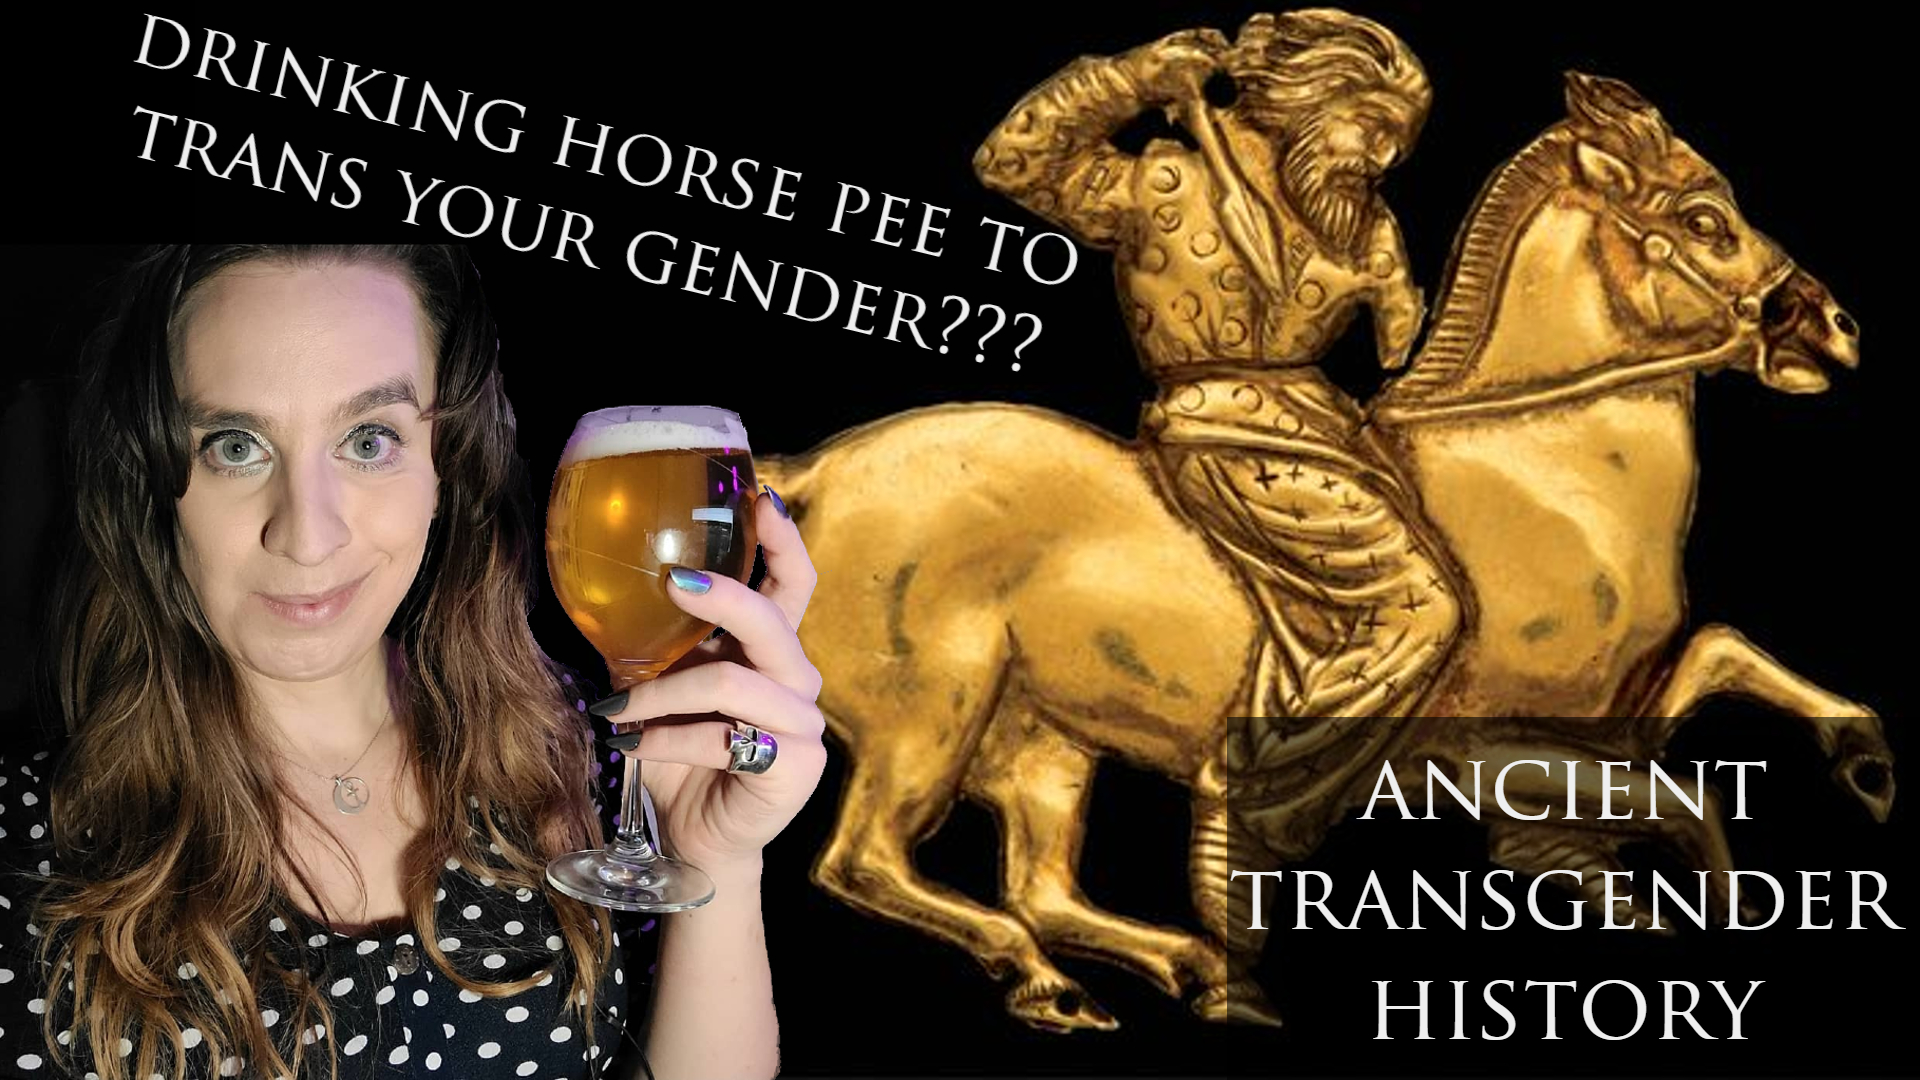 A photo of Sophie holding a glass of what looks like beer, with the caption "drinking horse pee to trans your gender?" over a backdrop of a Scythian horse and the phrase "ancient transgender history"